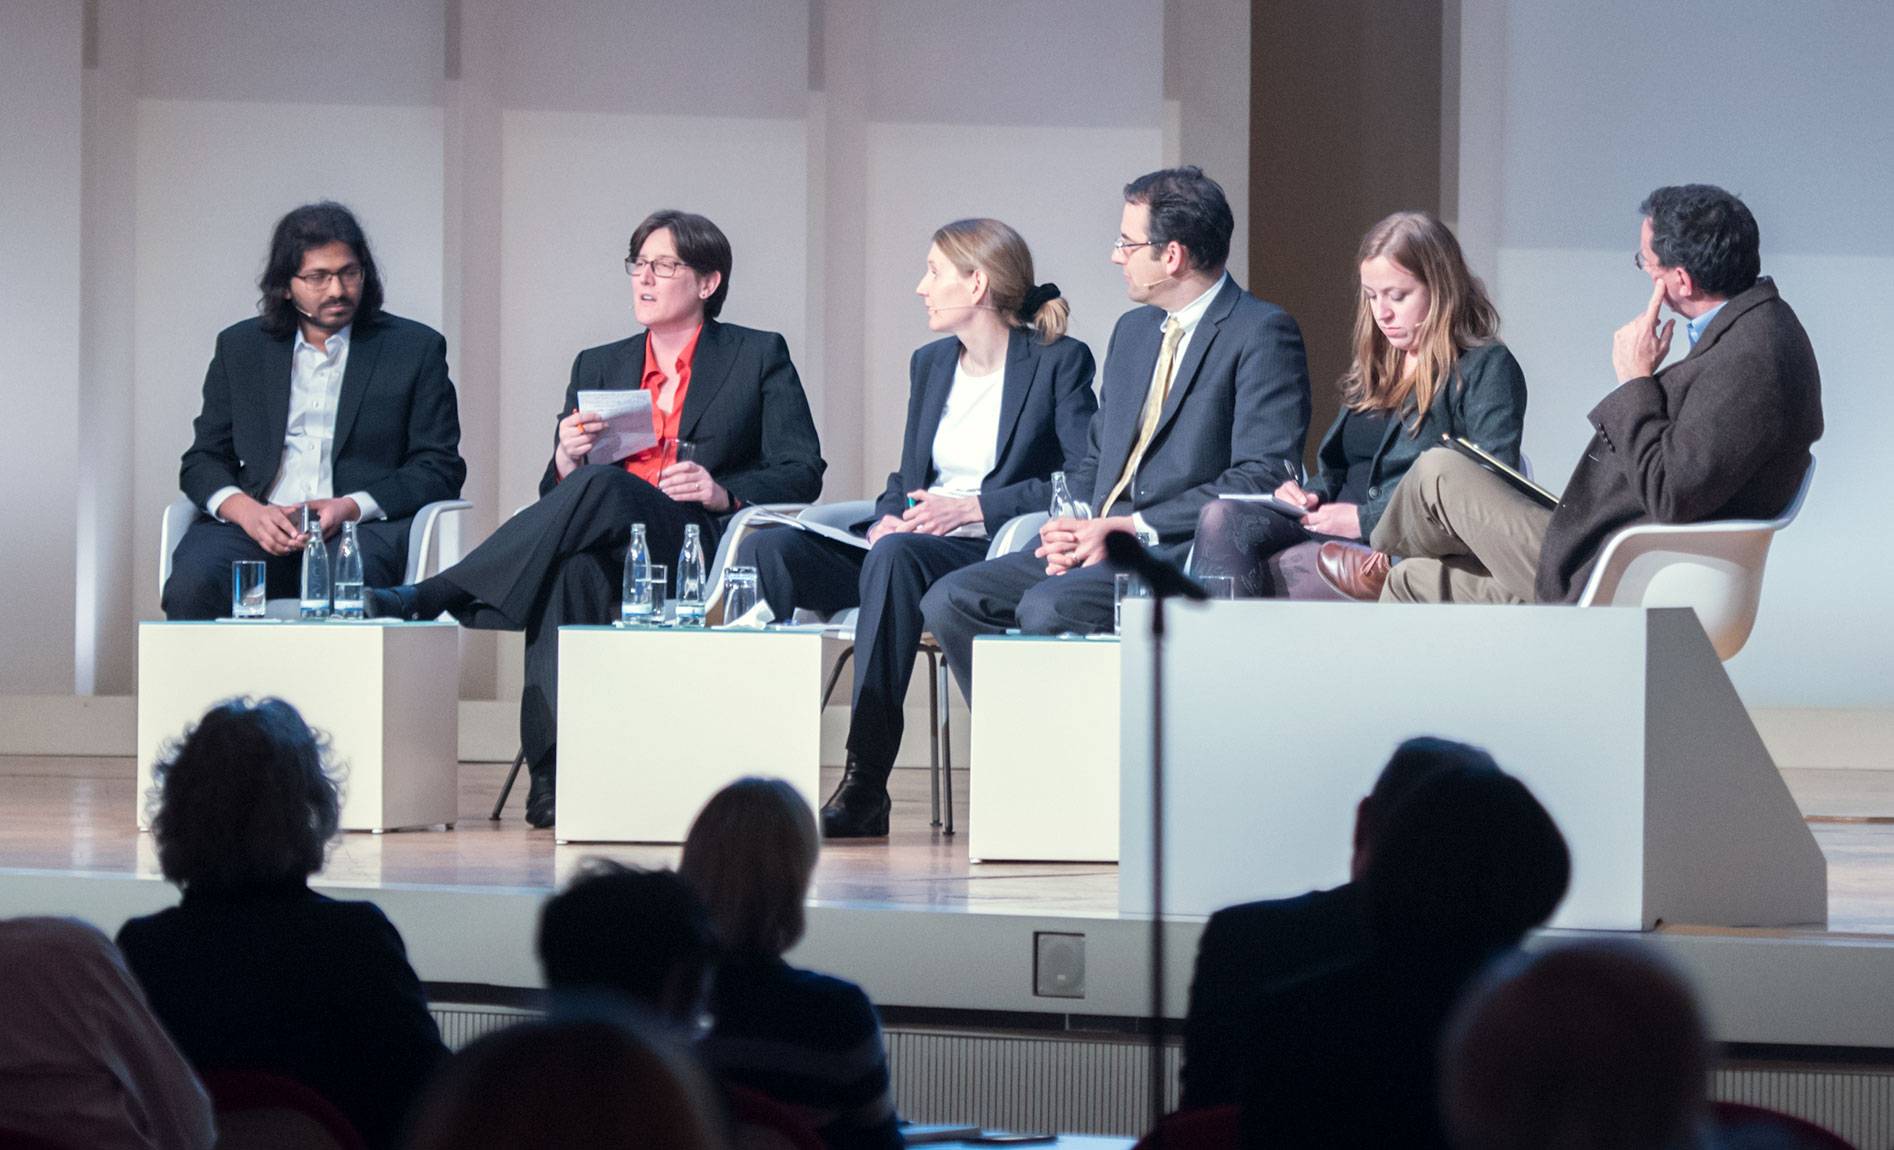 Princeton’s Prateek Mittal and Jennifer Rexford in panel at the Princeton-Fung Global Forum in Berlin